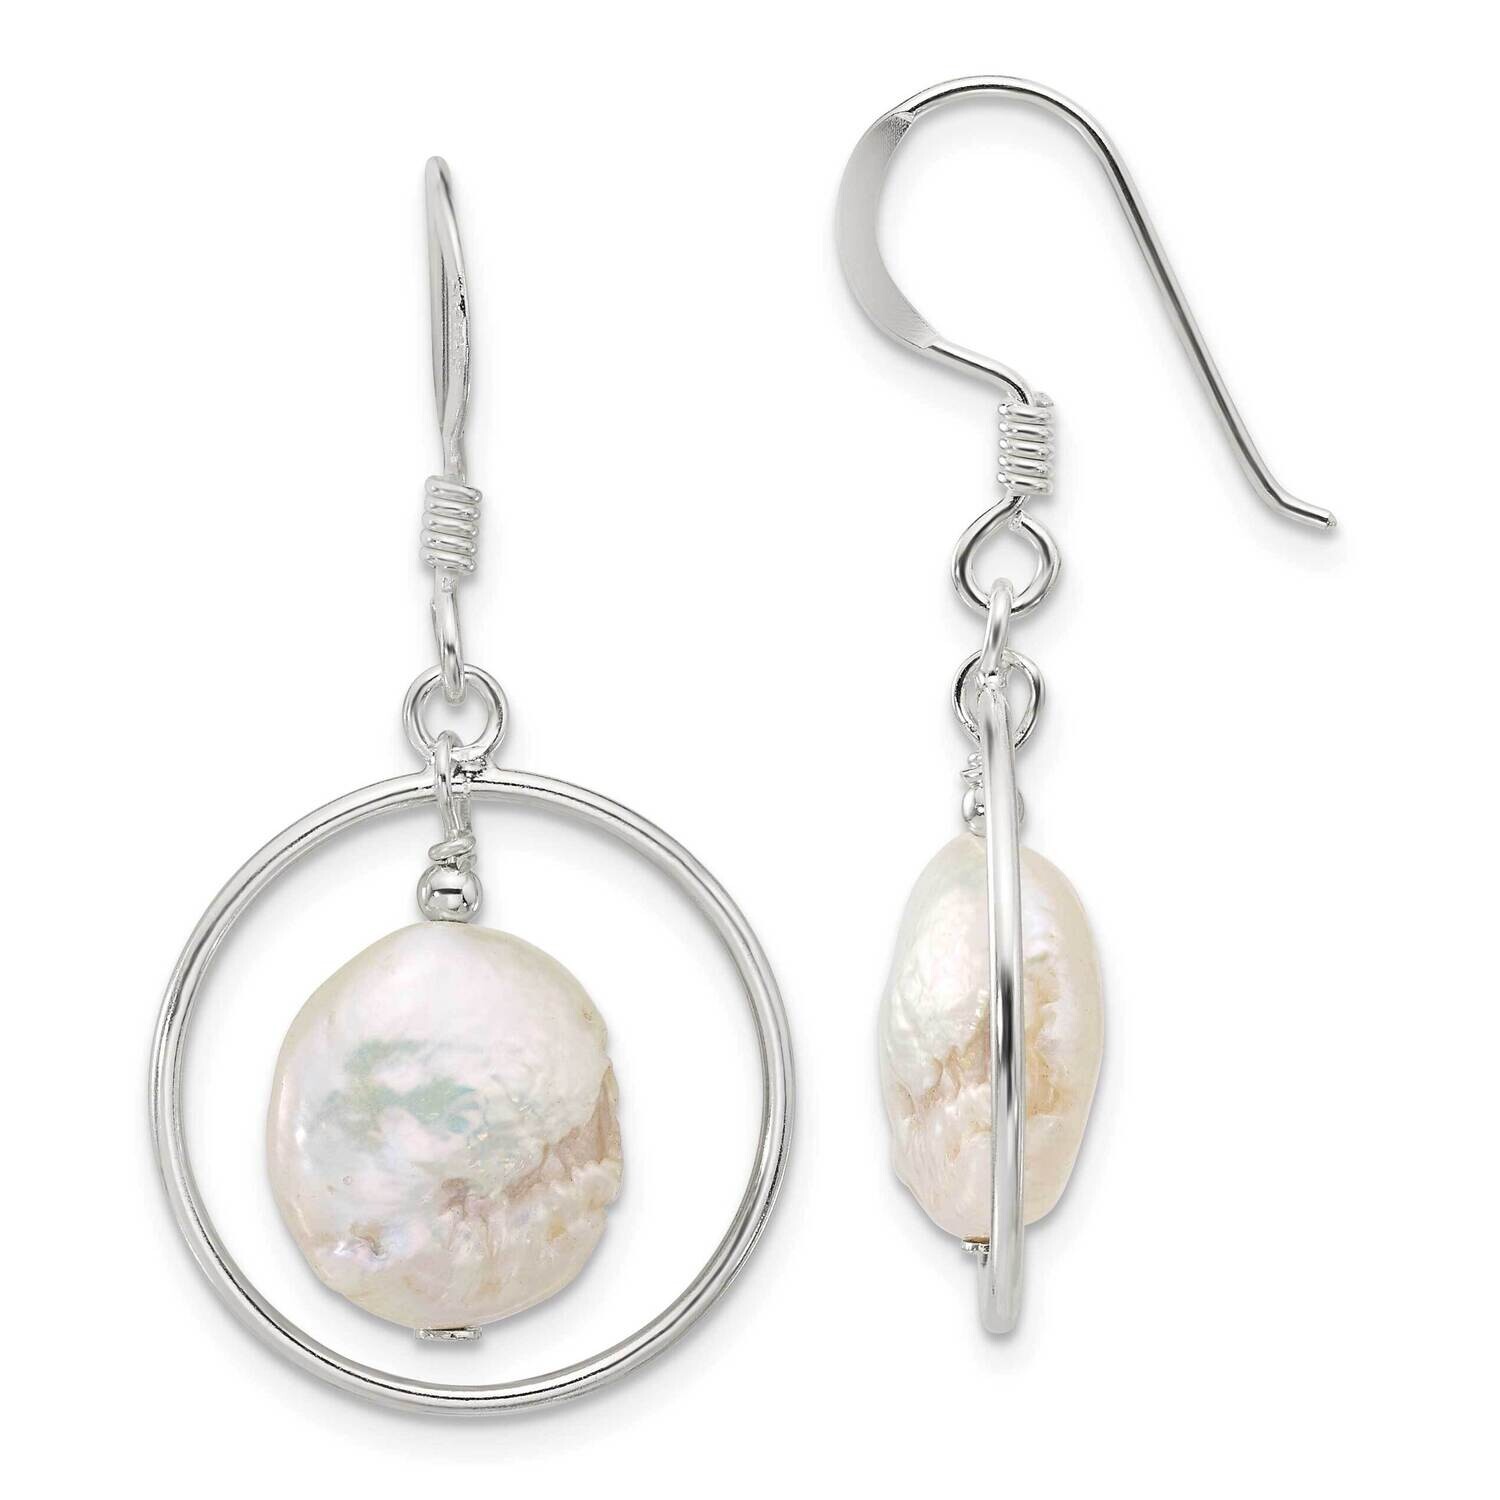 Fwc Coin Pearl Circle Dangle Earrings Sterling Silver Polished QE17395